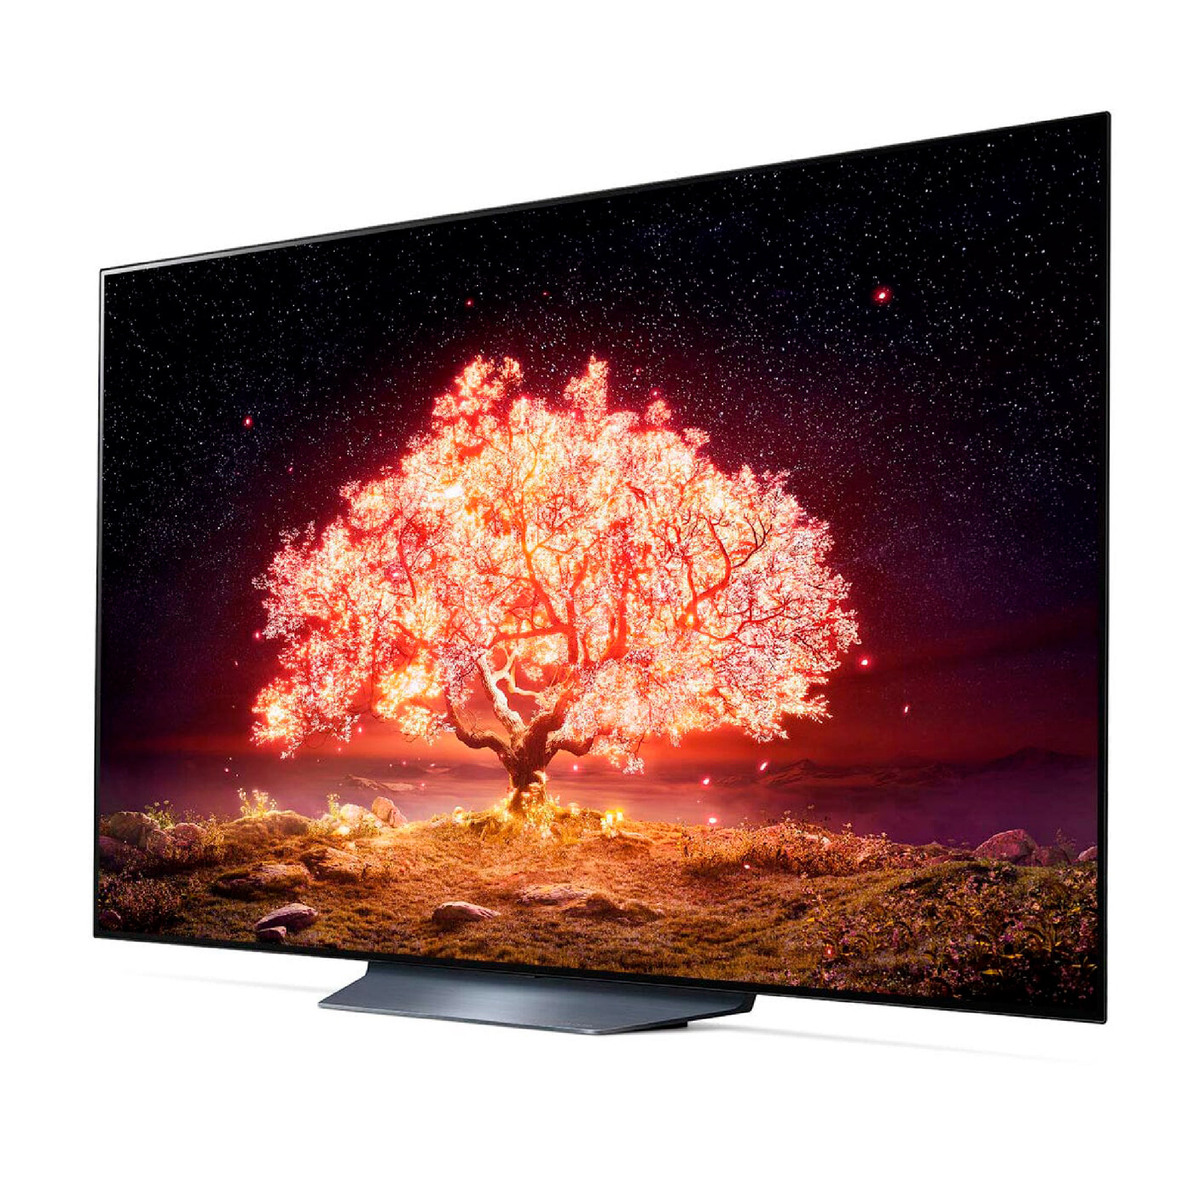 LG OLED TV 65inch B1 Series Cinema Screen Design, New 2021 4K Cinema HDR webOS Smart with ThinQ AI Pixel Dimming